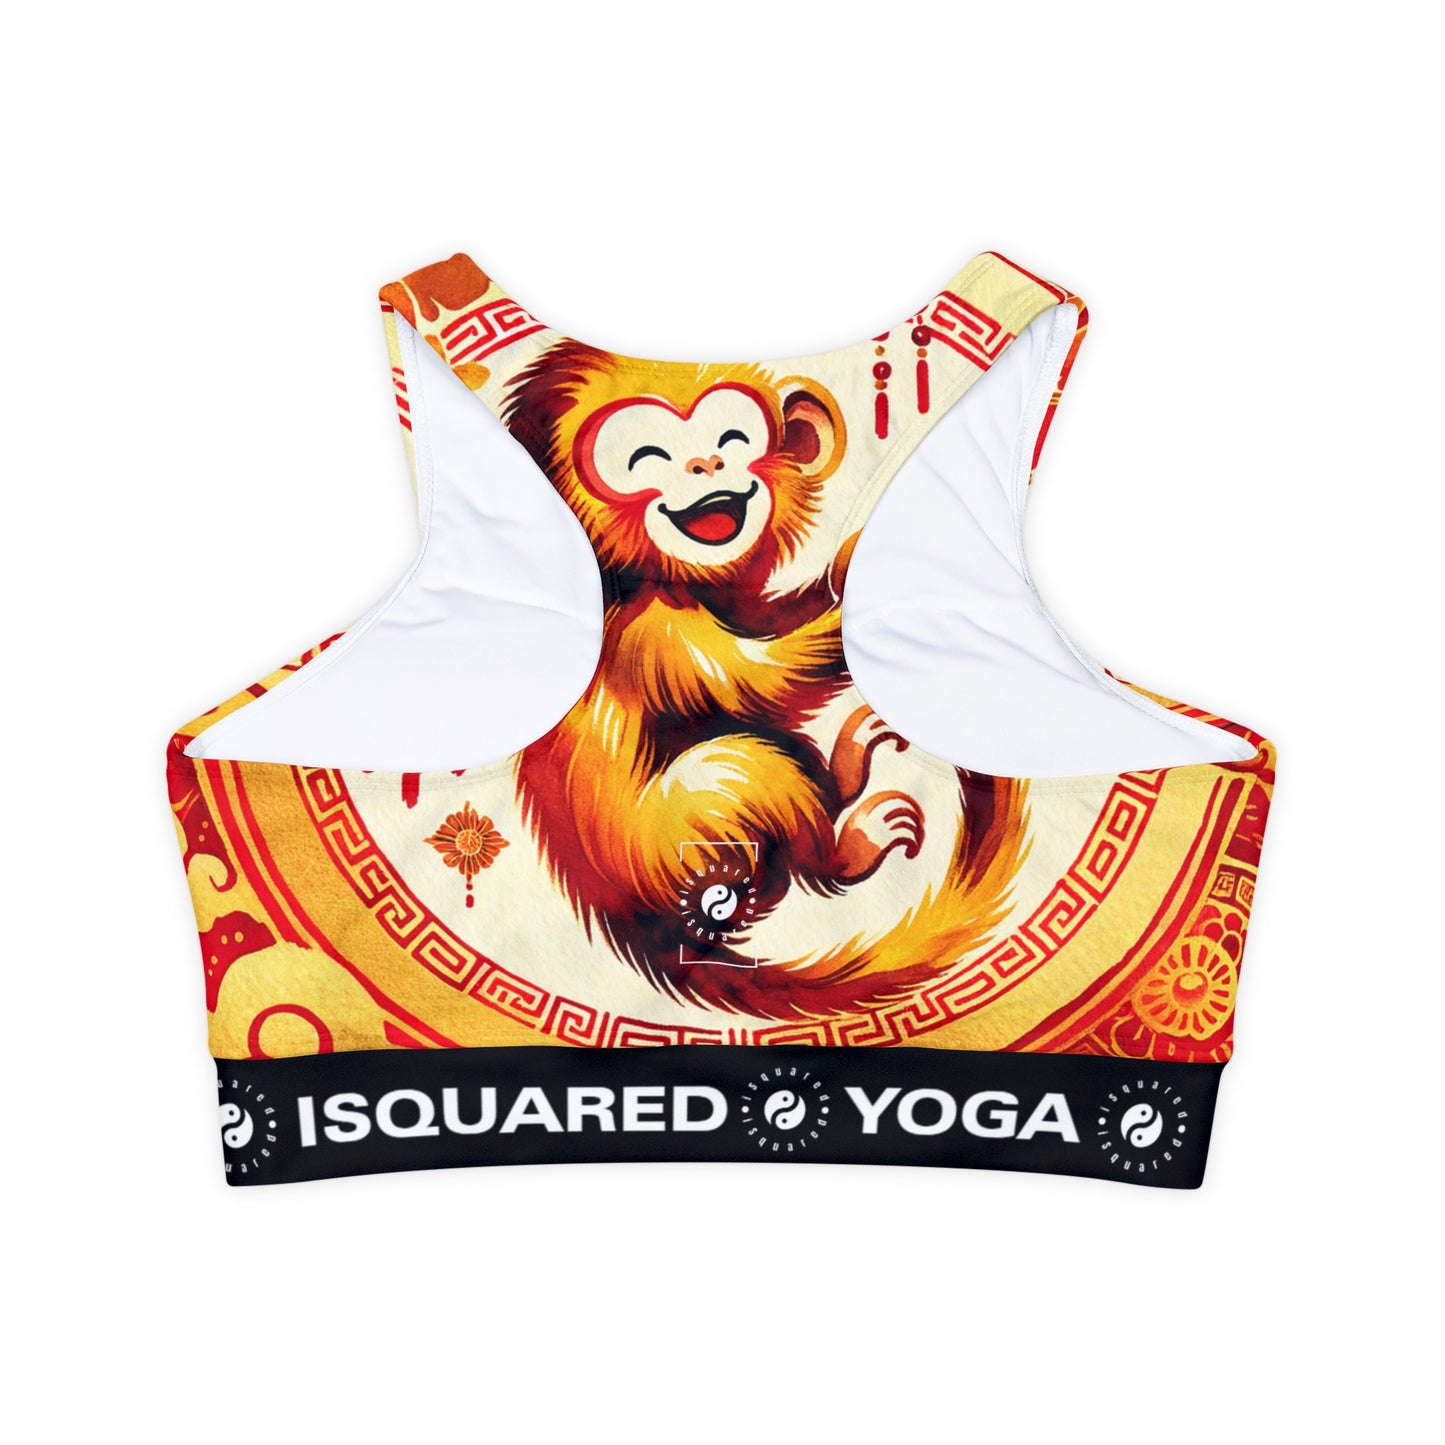 "Golden Simian Serenity in Scarlet Radiance" - Lined & Padded Sports Bra